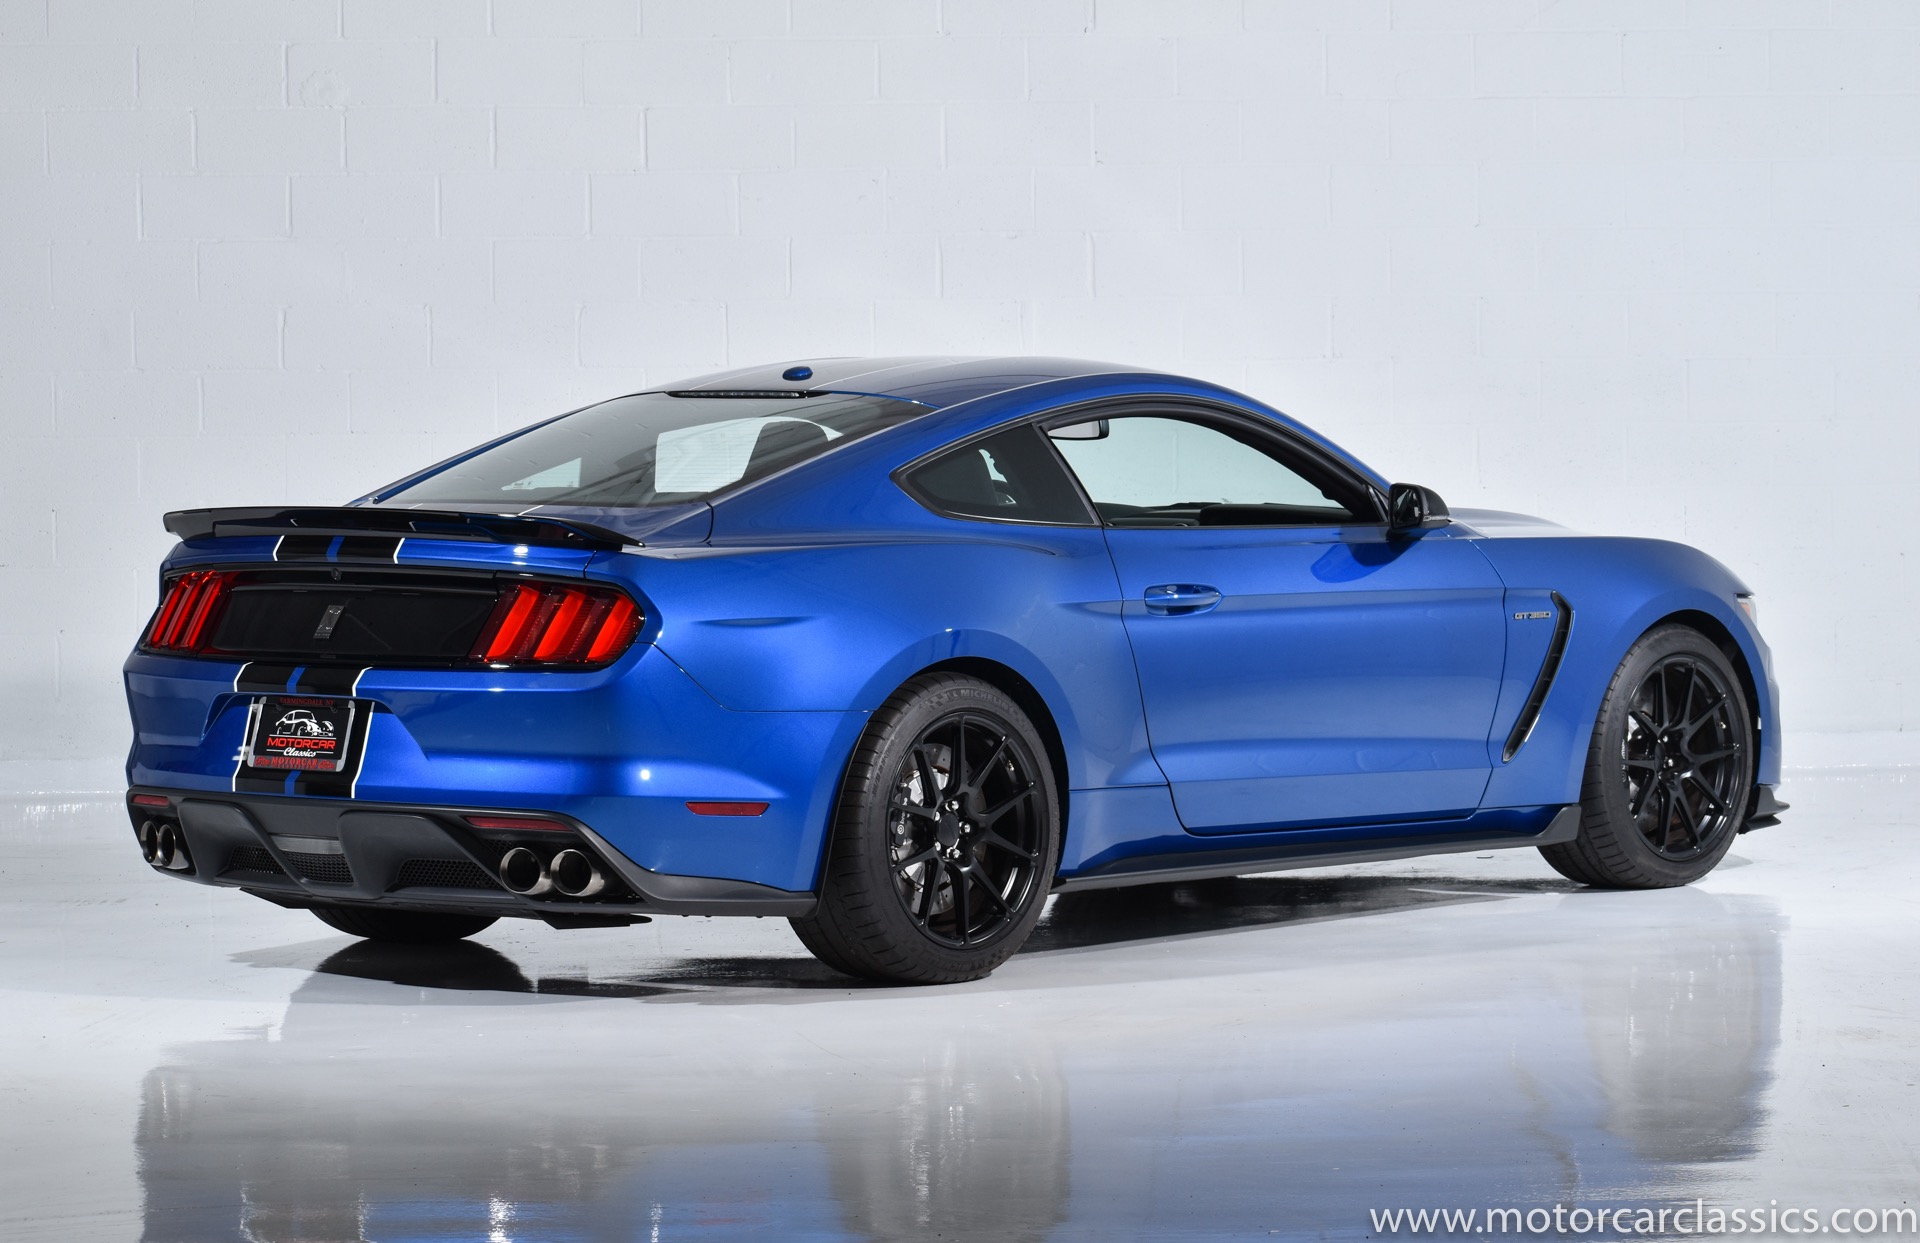 Used 2017 Ford Mustang Shelby GT350 For Sale ($57,900) | Motorcar ...